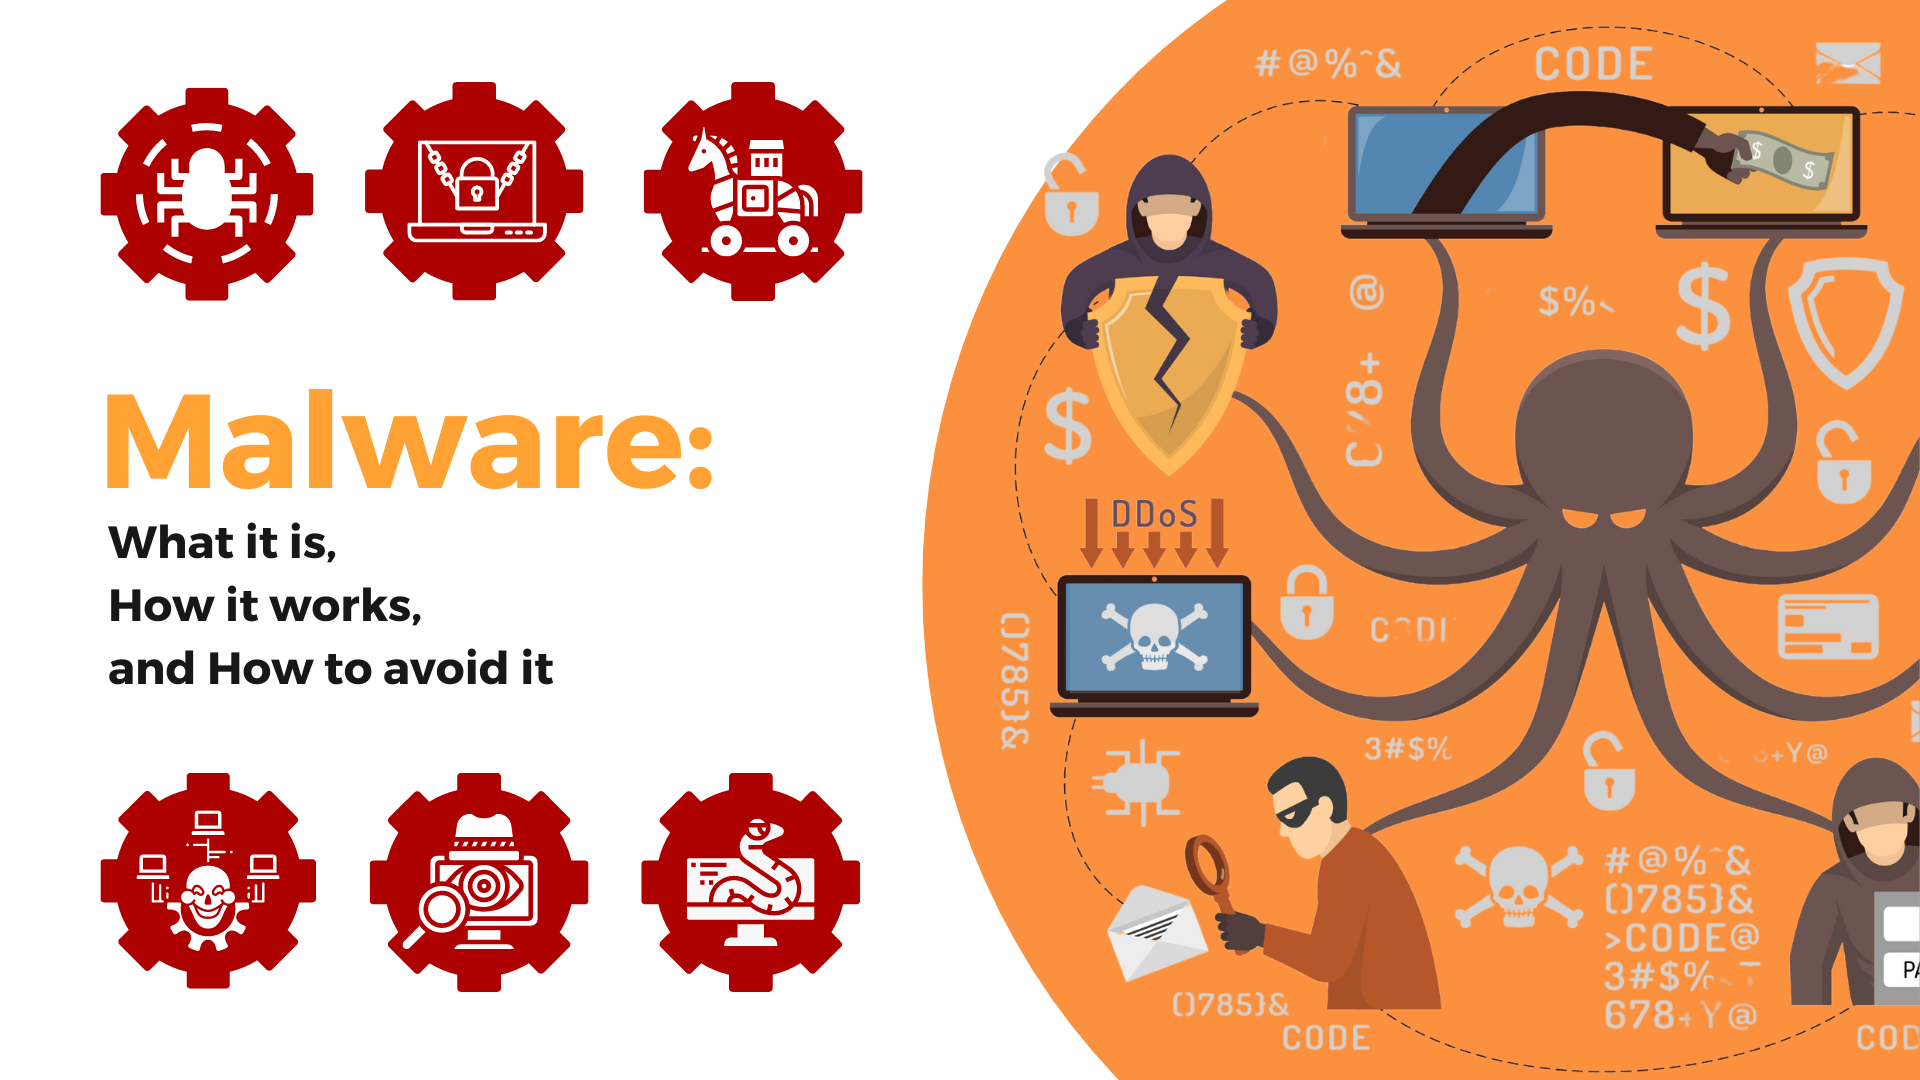 MALWARE _what it is, how it works, and how to avoid it_Feature image 2